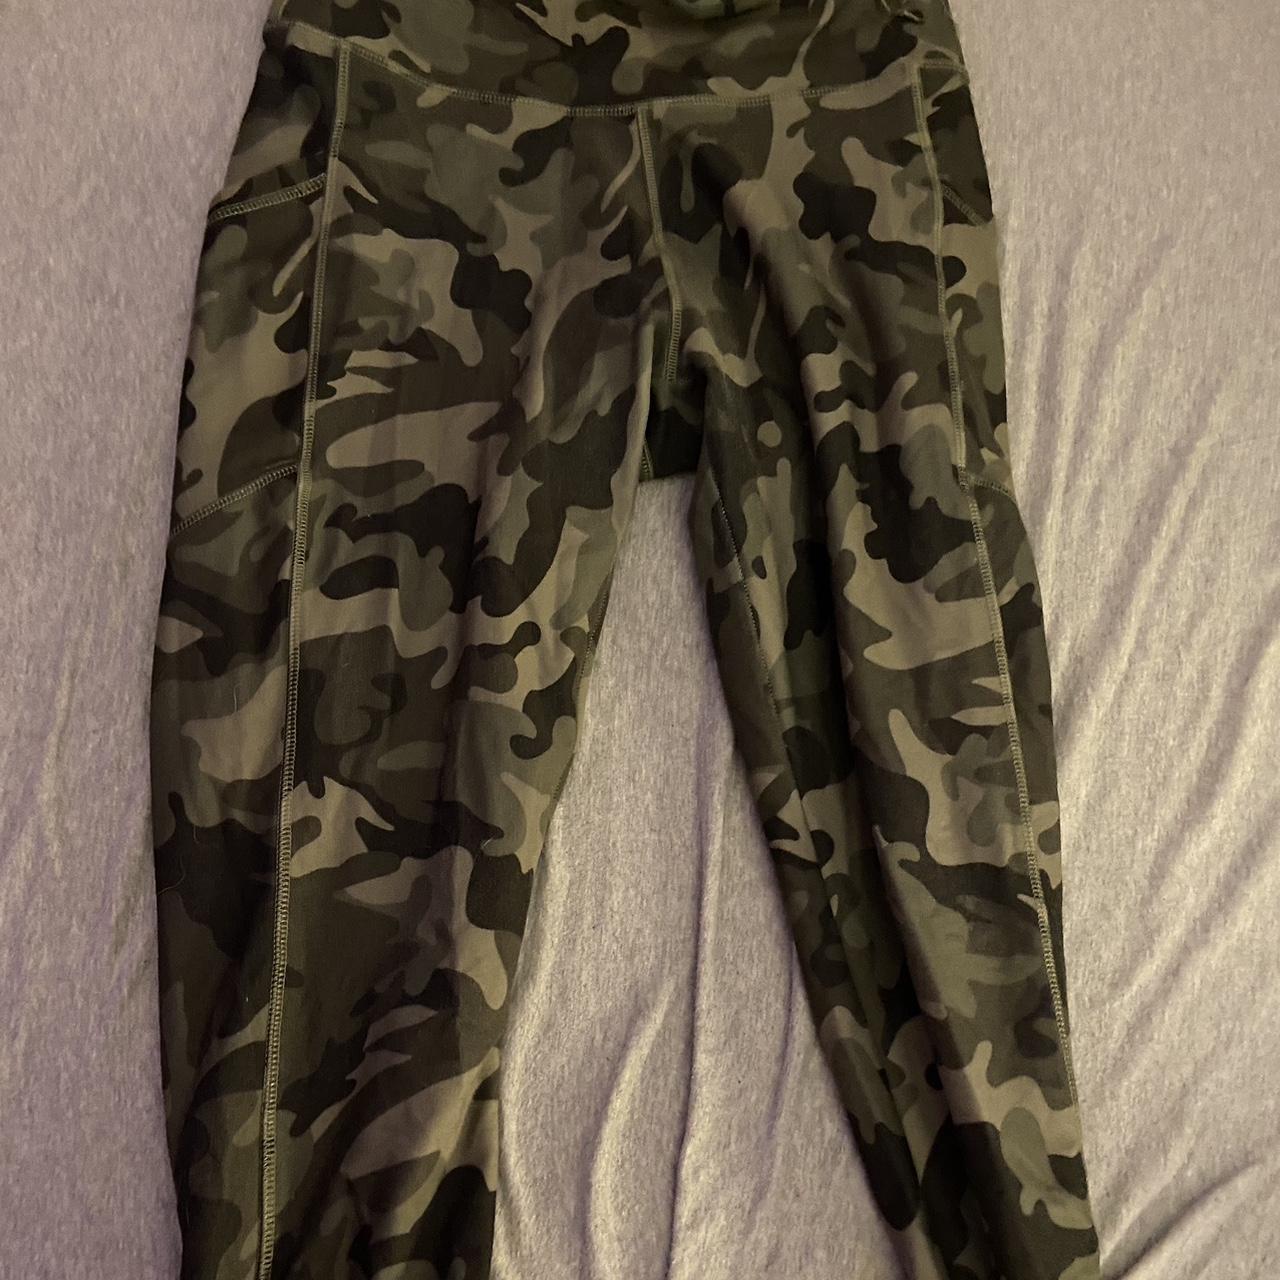 Under Armour® Women's EVO Scent-Control Leggings in #realtreeXtra.  #camoleggings | Hunting clothes, Outdoor girls, Country girl style